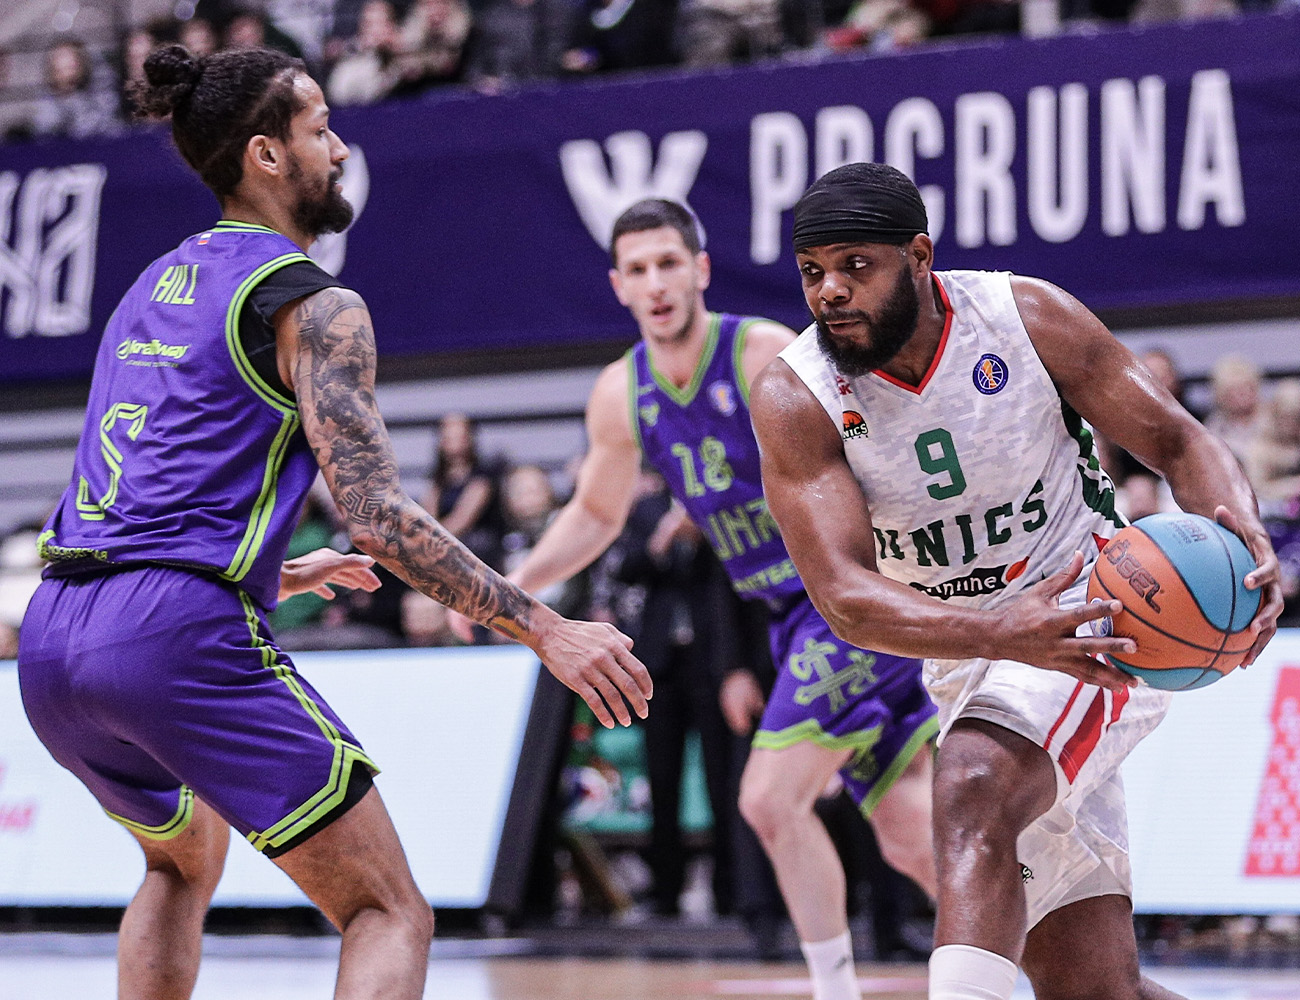 UNICS started the new year with the win in Moscow